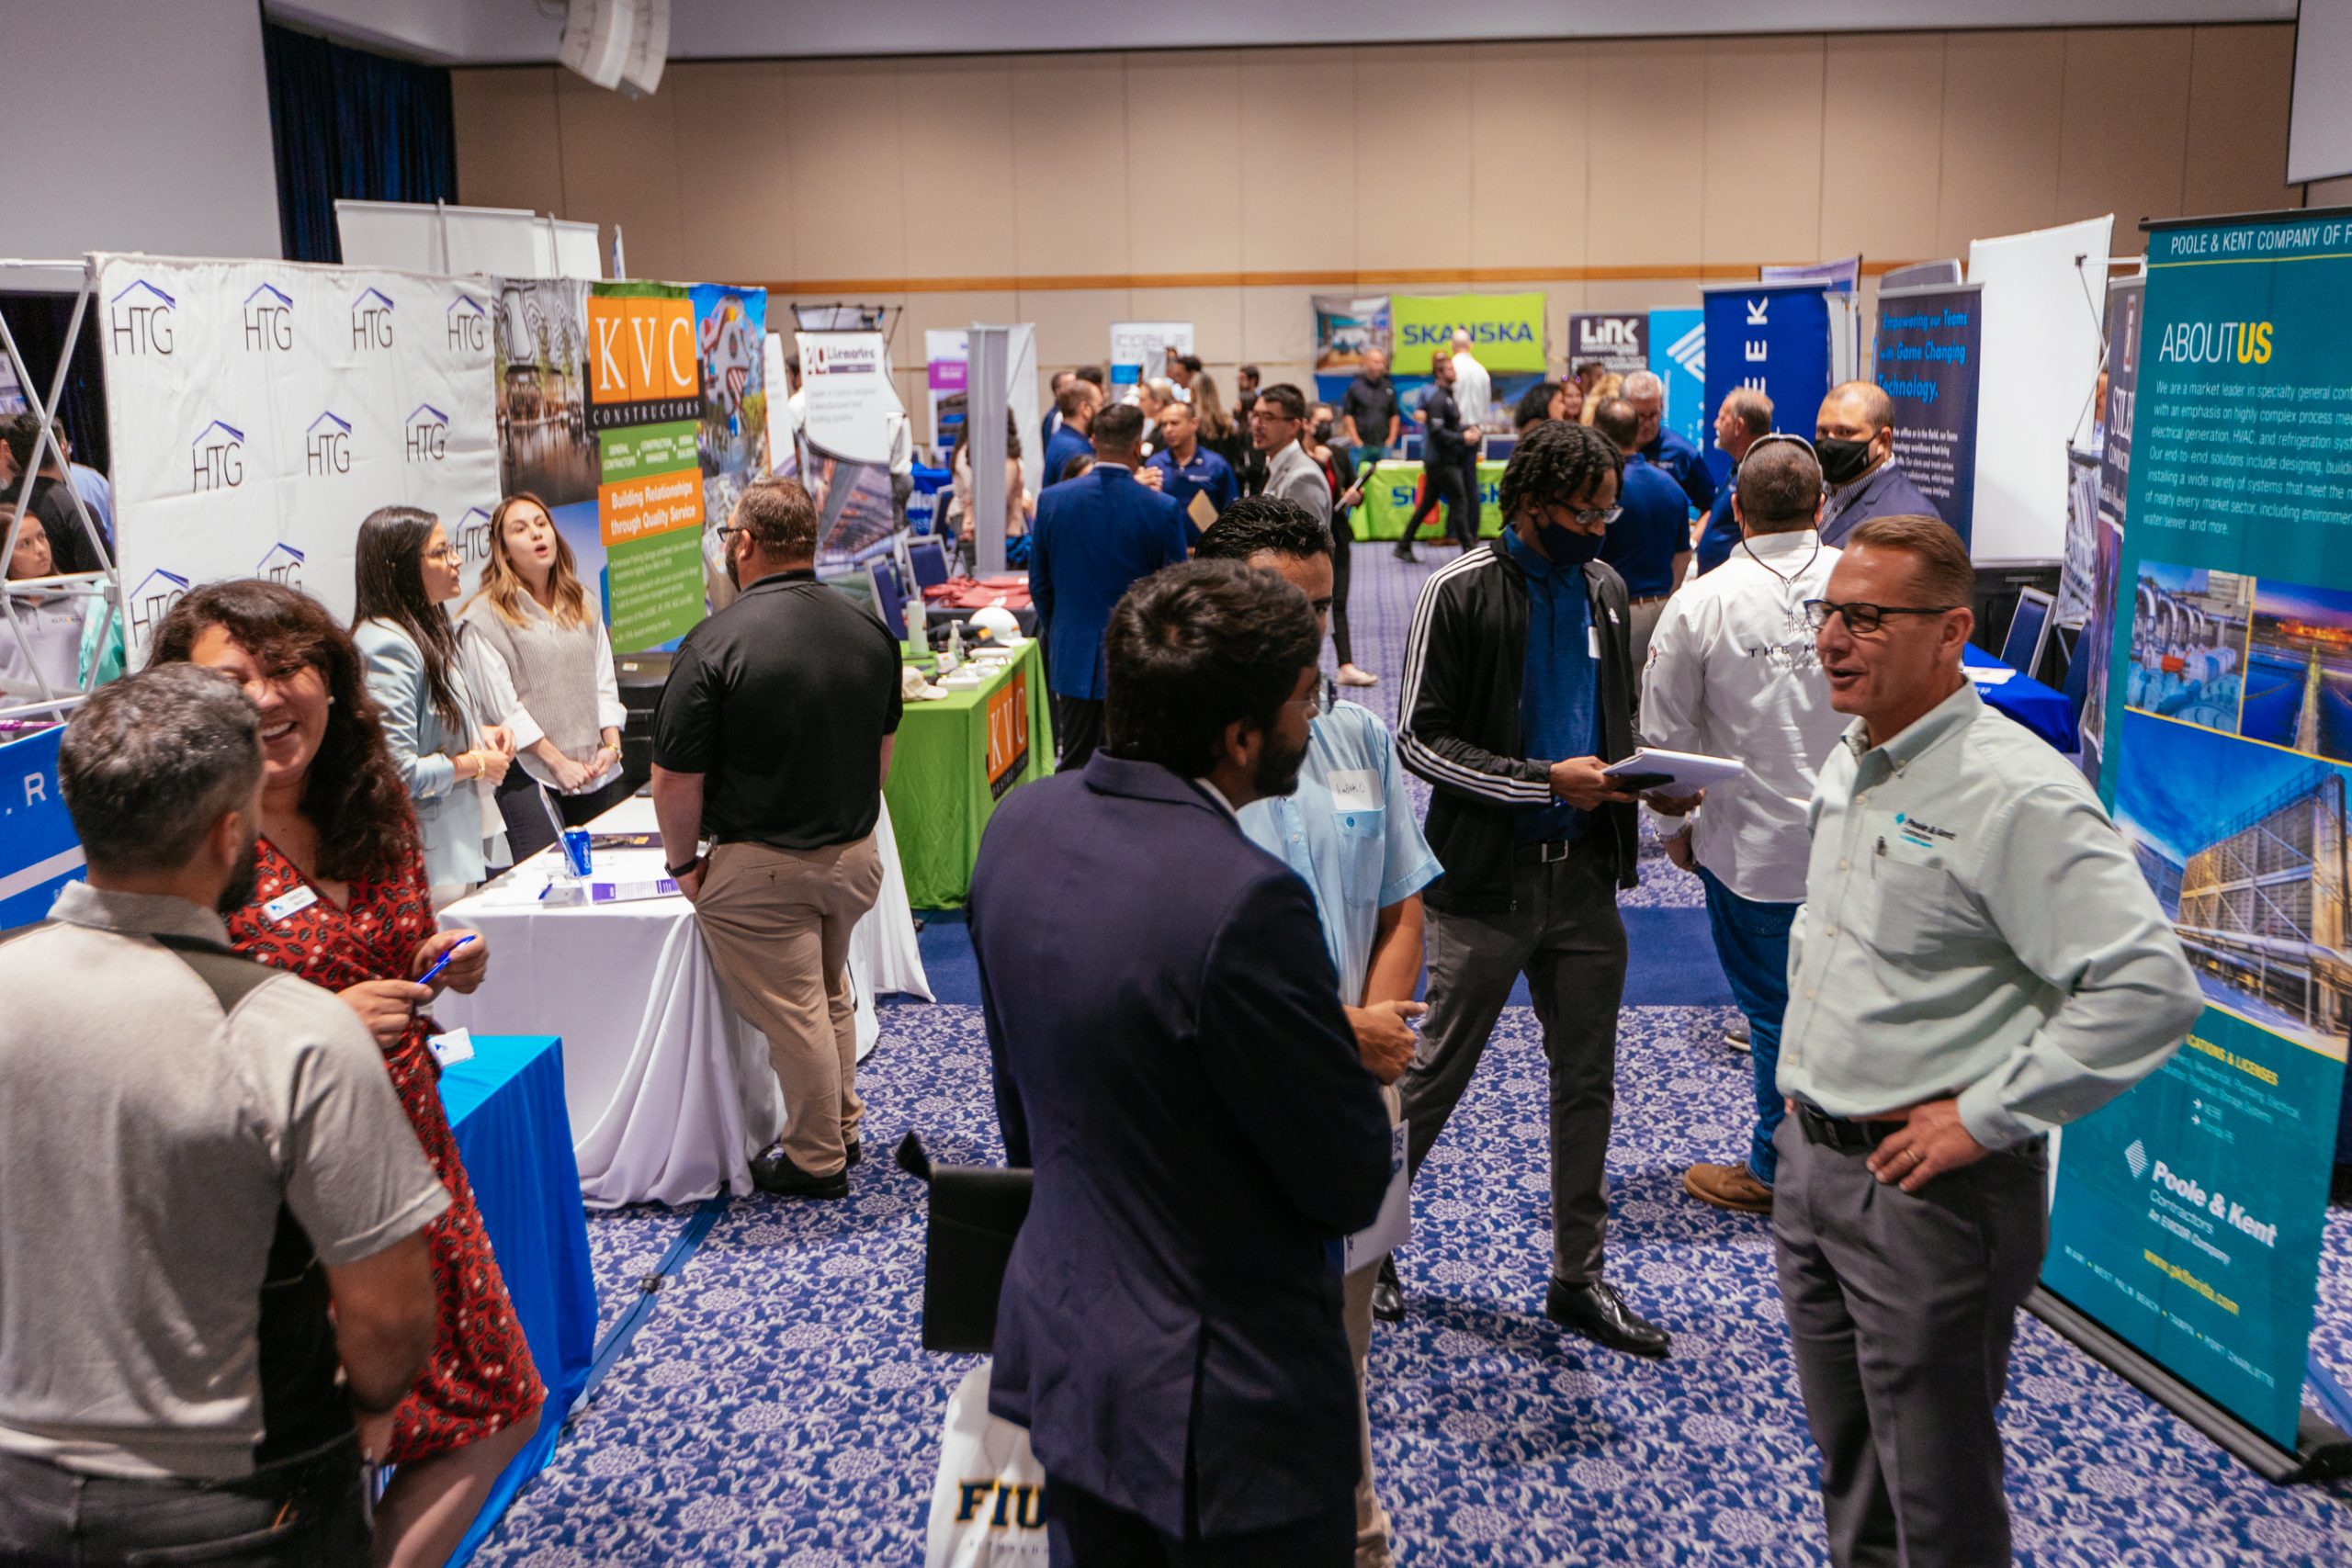 Moss Department of Construction Management welcomed more than 40 companies, nearly 200 students at its Fall 2021 Career Expo